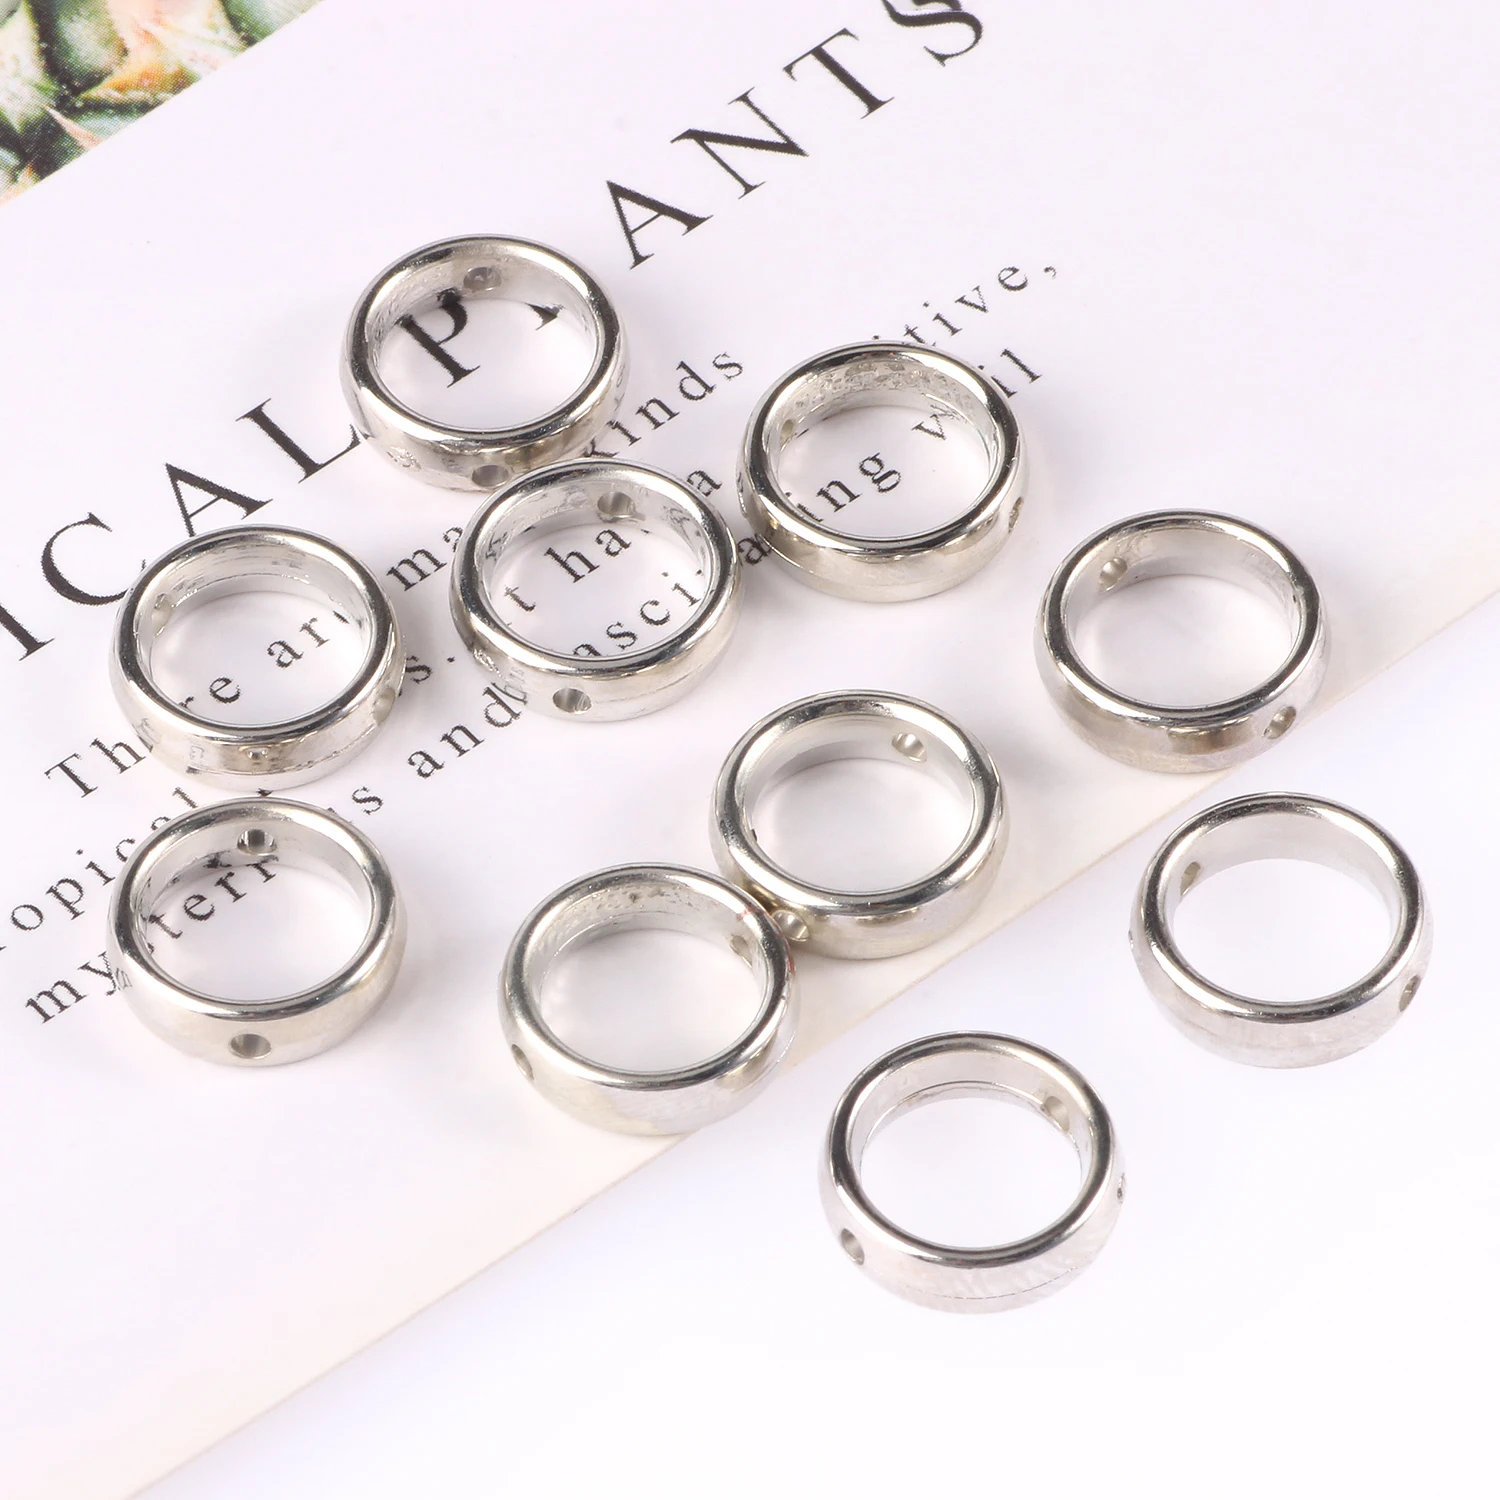 

12mm 50pcs Double Hole Ring Spacer CCB Beads Circle Jump Rings Connectors DIY Earrings Pendants For Jewelry Making Accessories